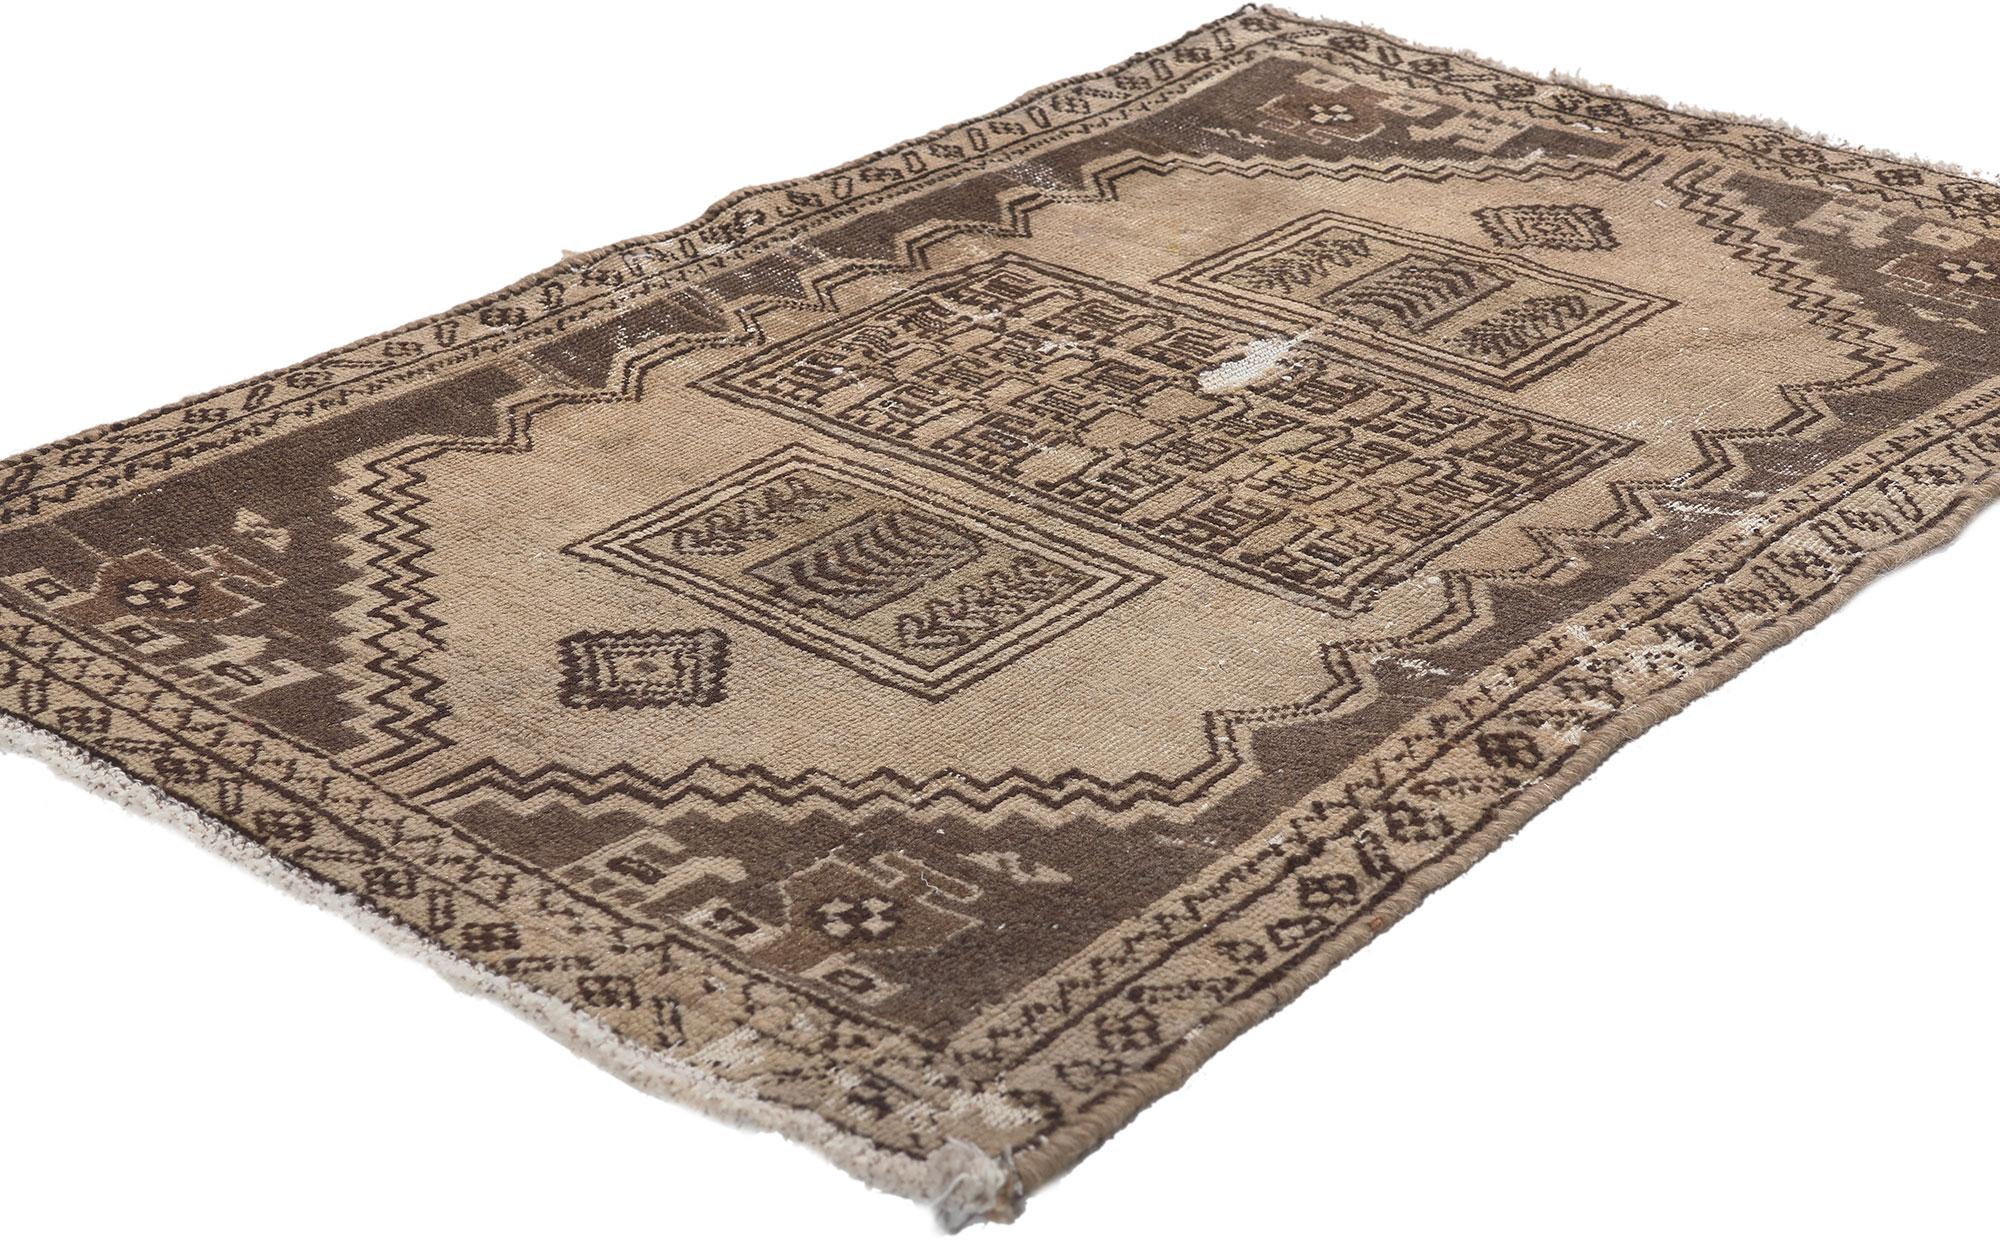 78580 Antique Worn Persian Hamadan Rug, 02'00 x 03'00.
Nomadic charm meets rustic finesse in this distressed antique Persian Hamadan rug. The  tribal design and earthy colorway woven into this piece work together creating a curated lived-in look